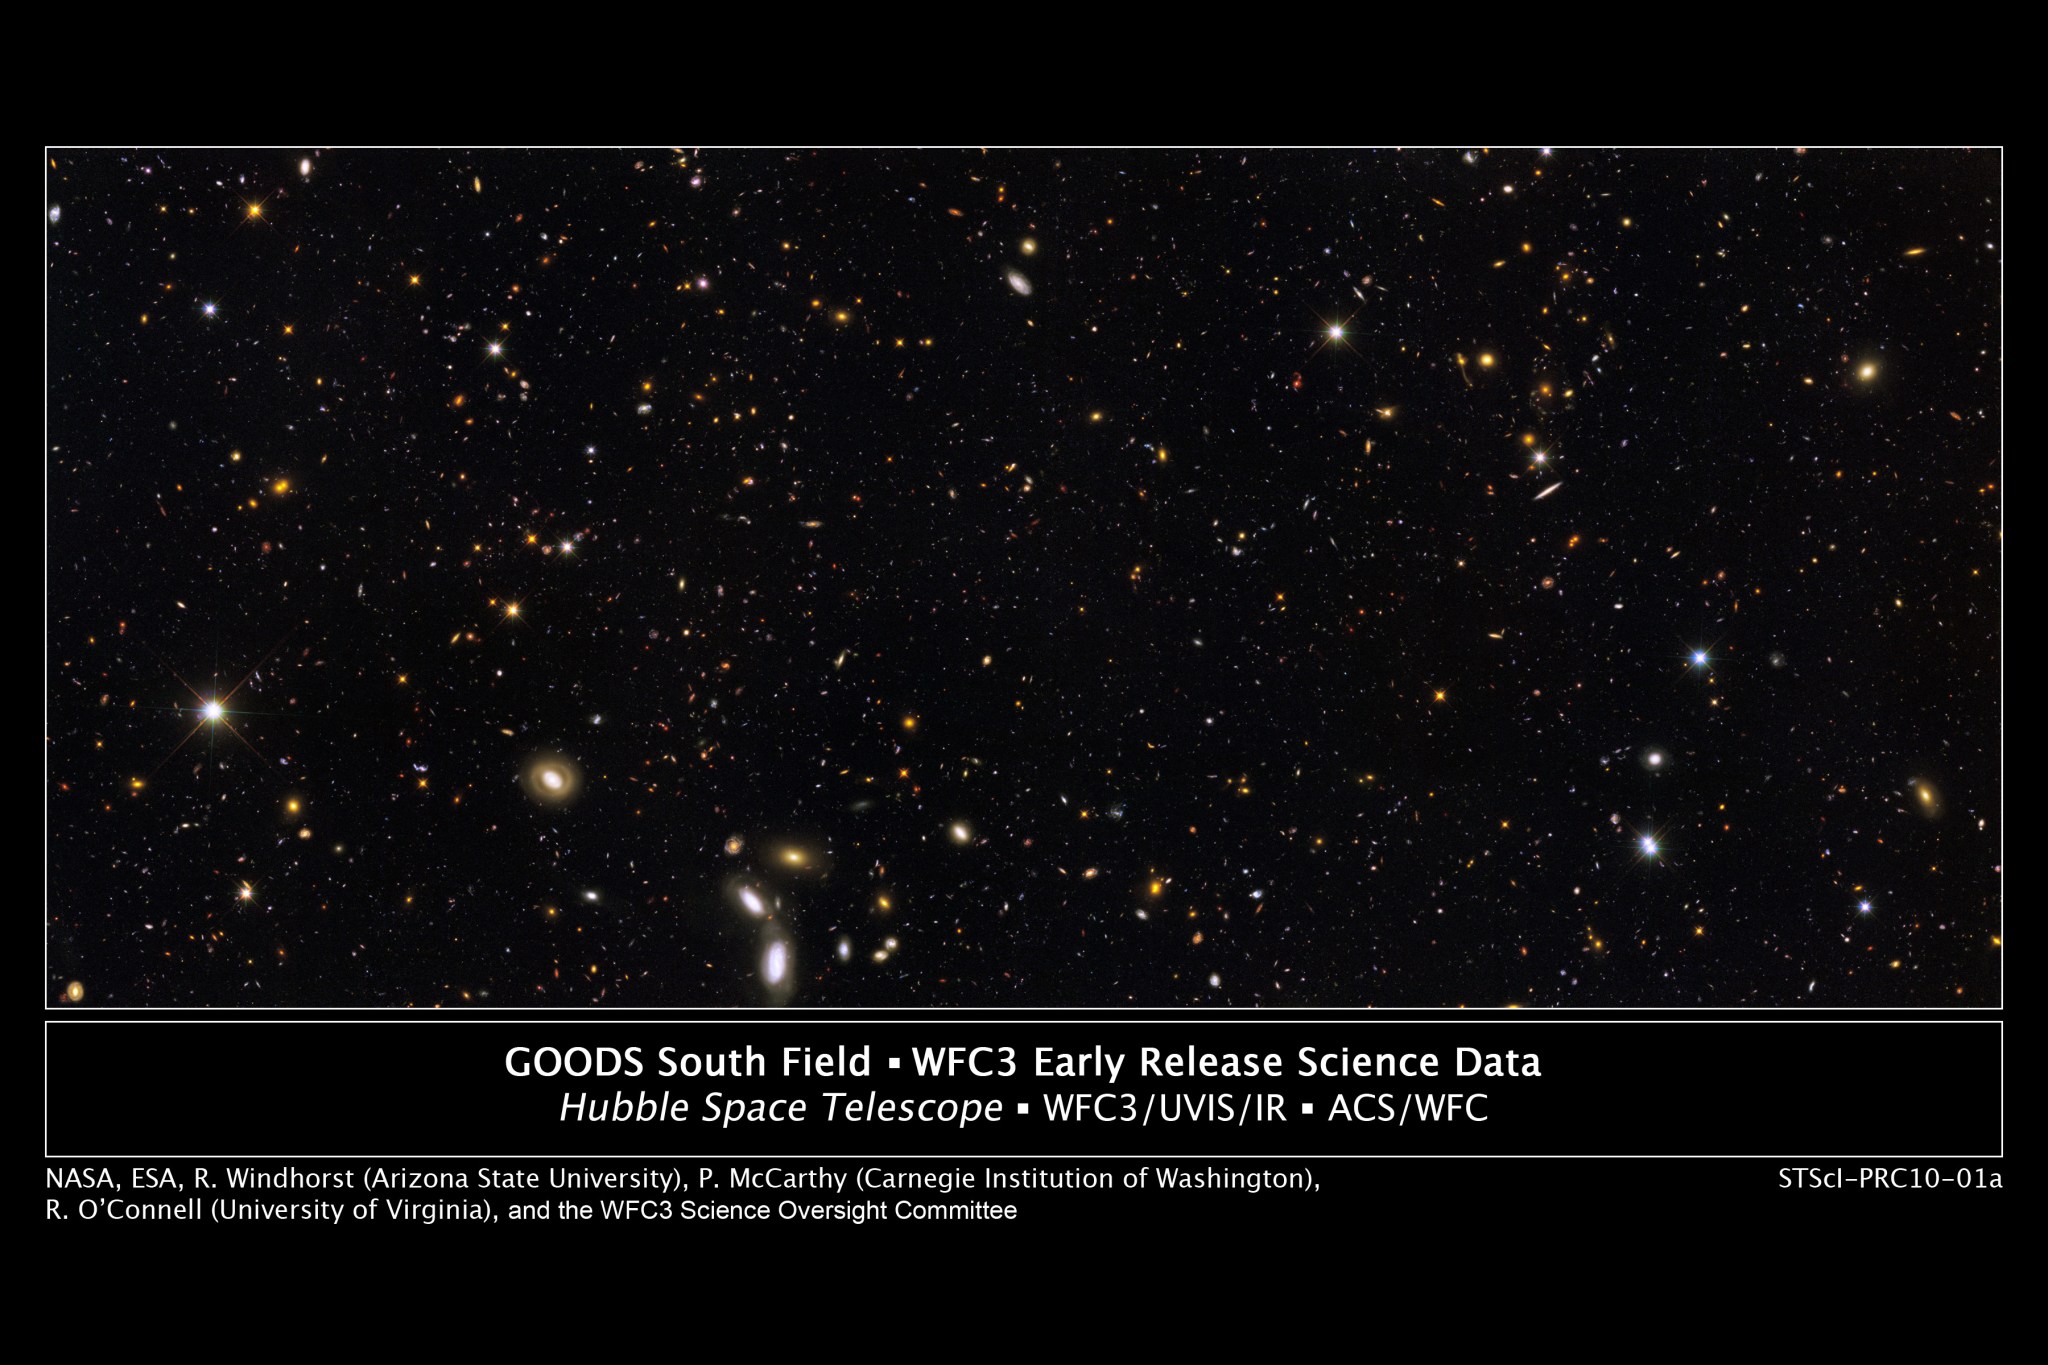 This is a Hubble Space Telescope view of a portion of GOODS-South, the southern field of a large deep-sky study.